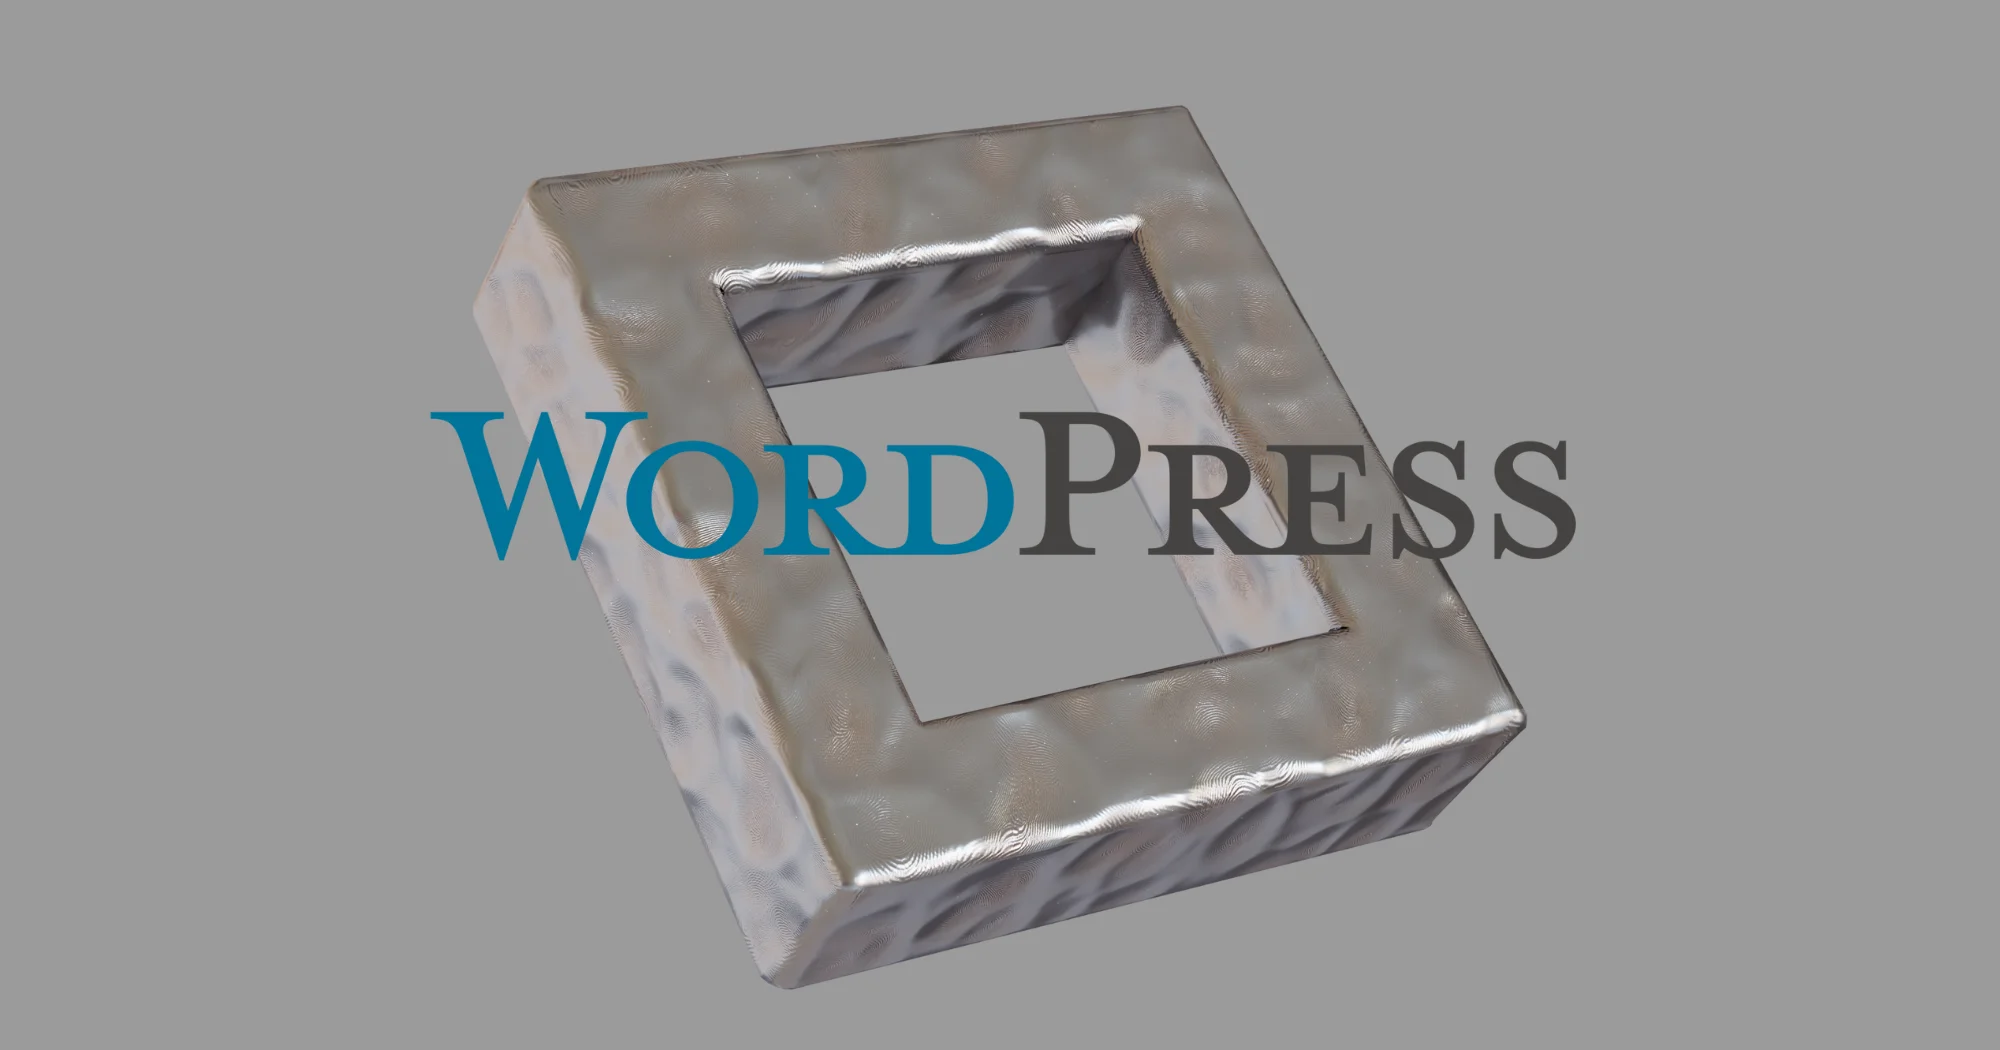 Architecture of a WordPress website and its themes